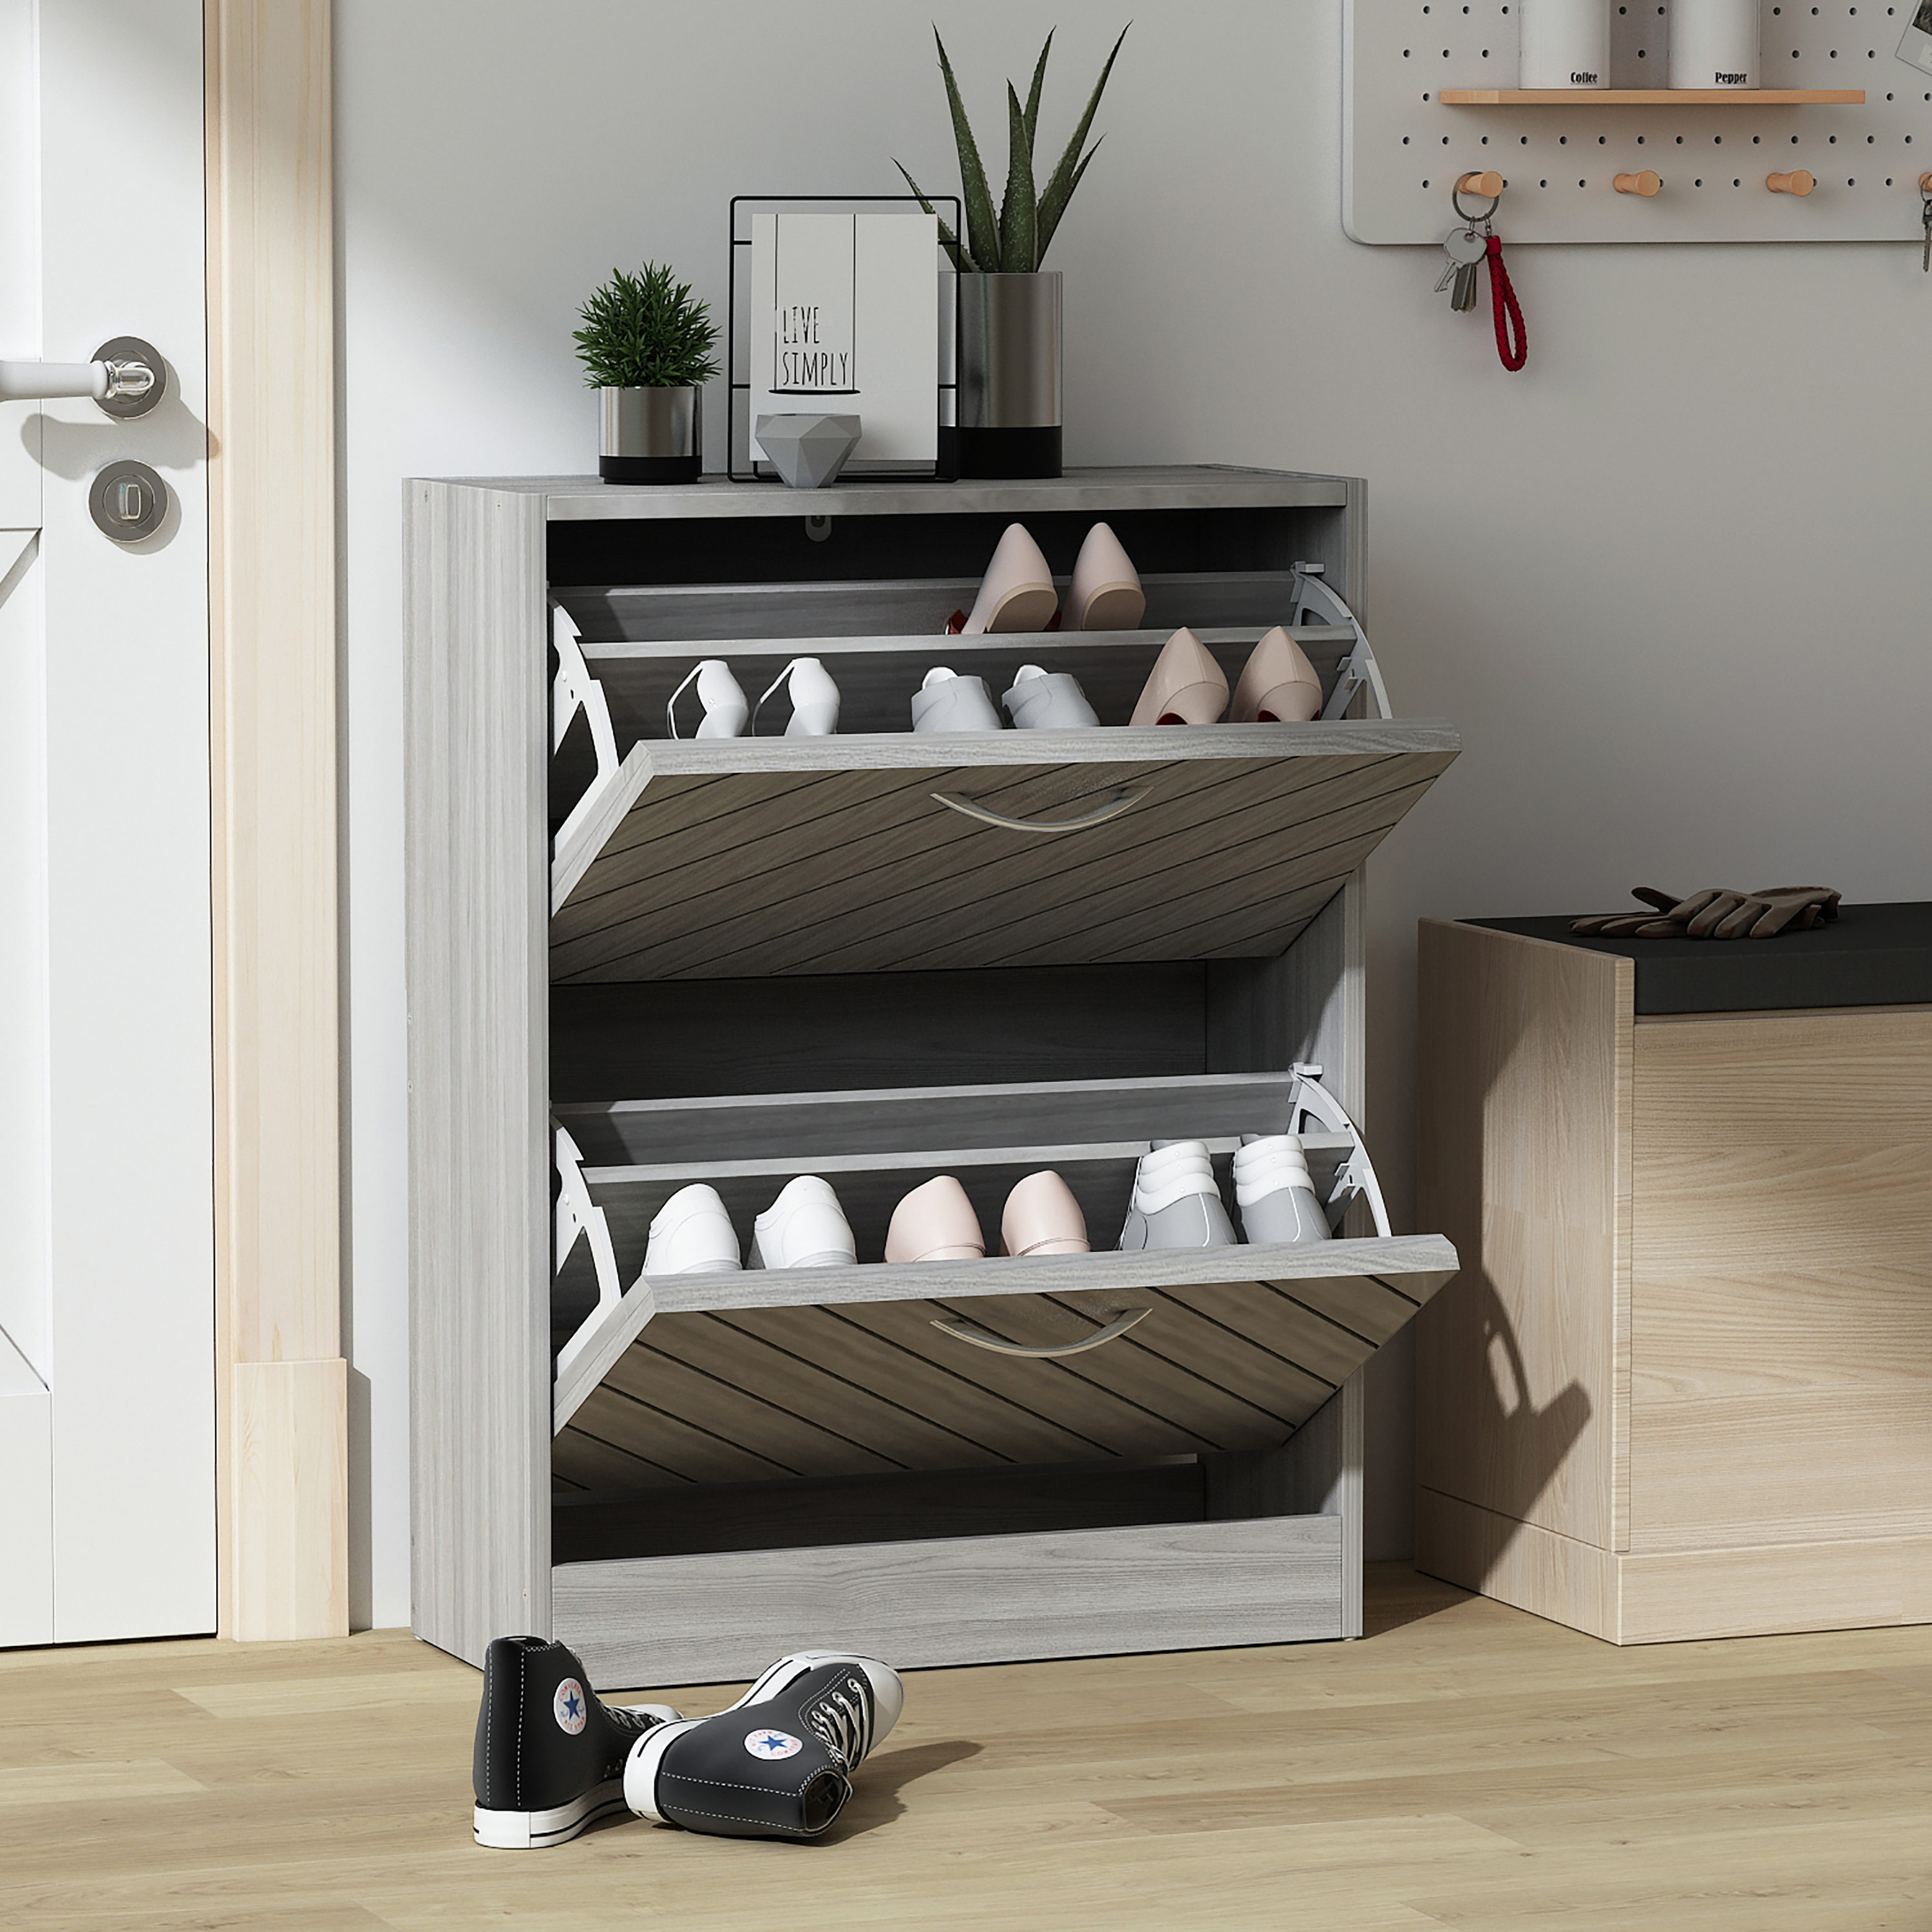 22.4 Shoe Storage Cabinet with 3 Flip Drawers Wood/ Grey by